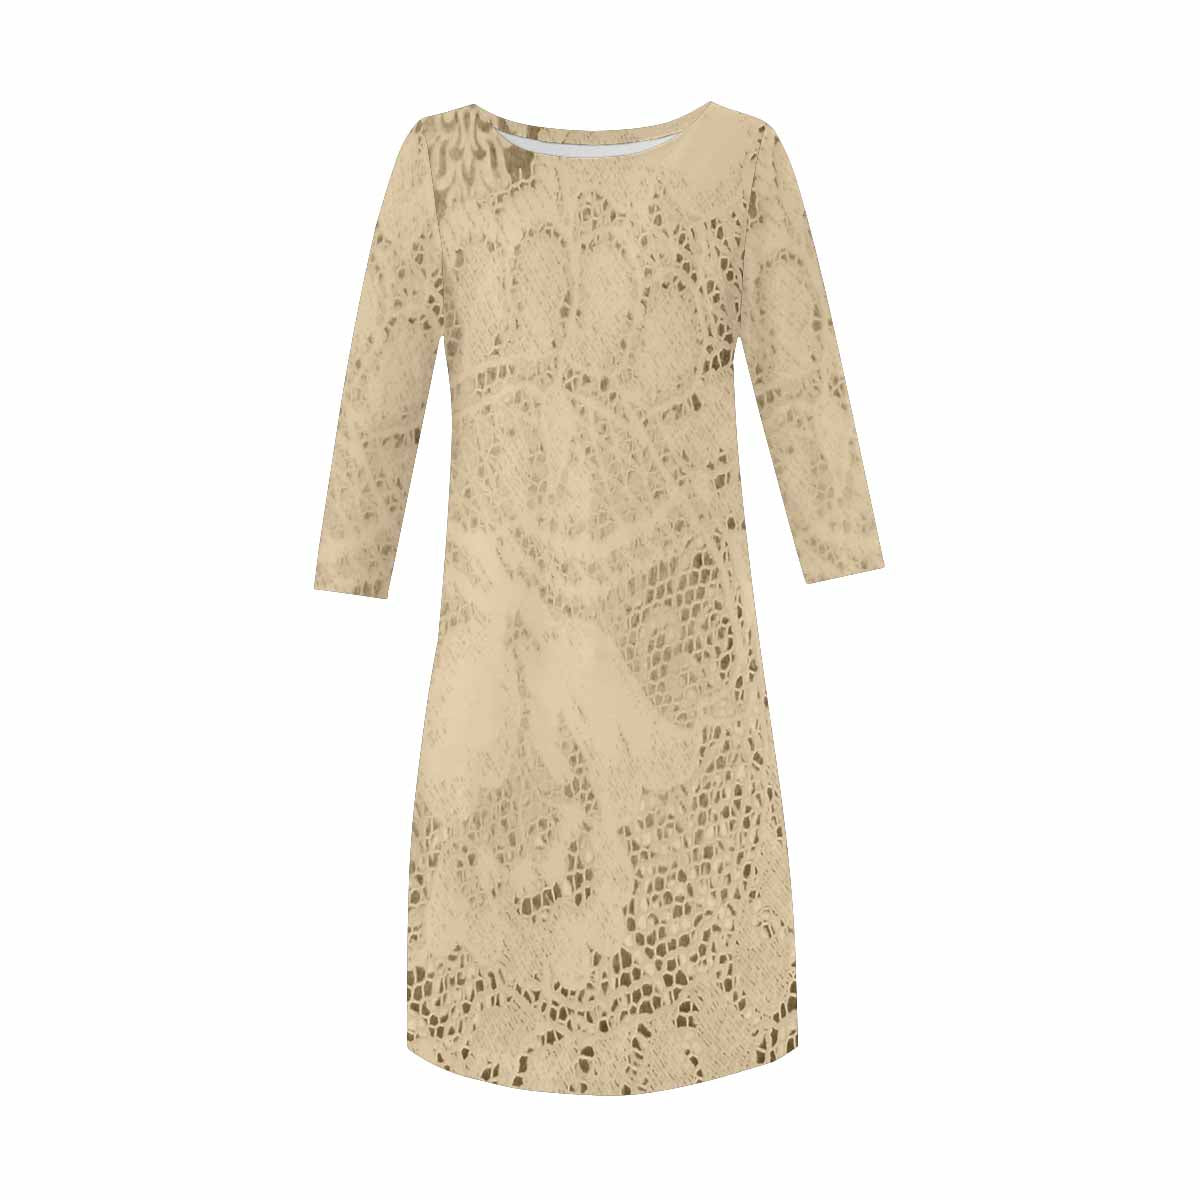 Victorian printed lace loose dress, Design 26